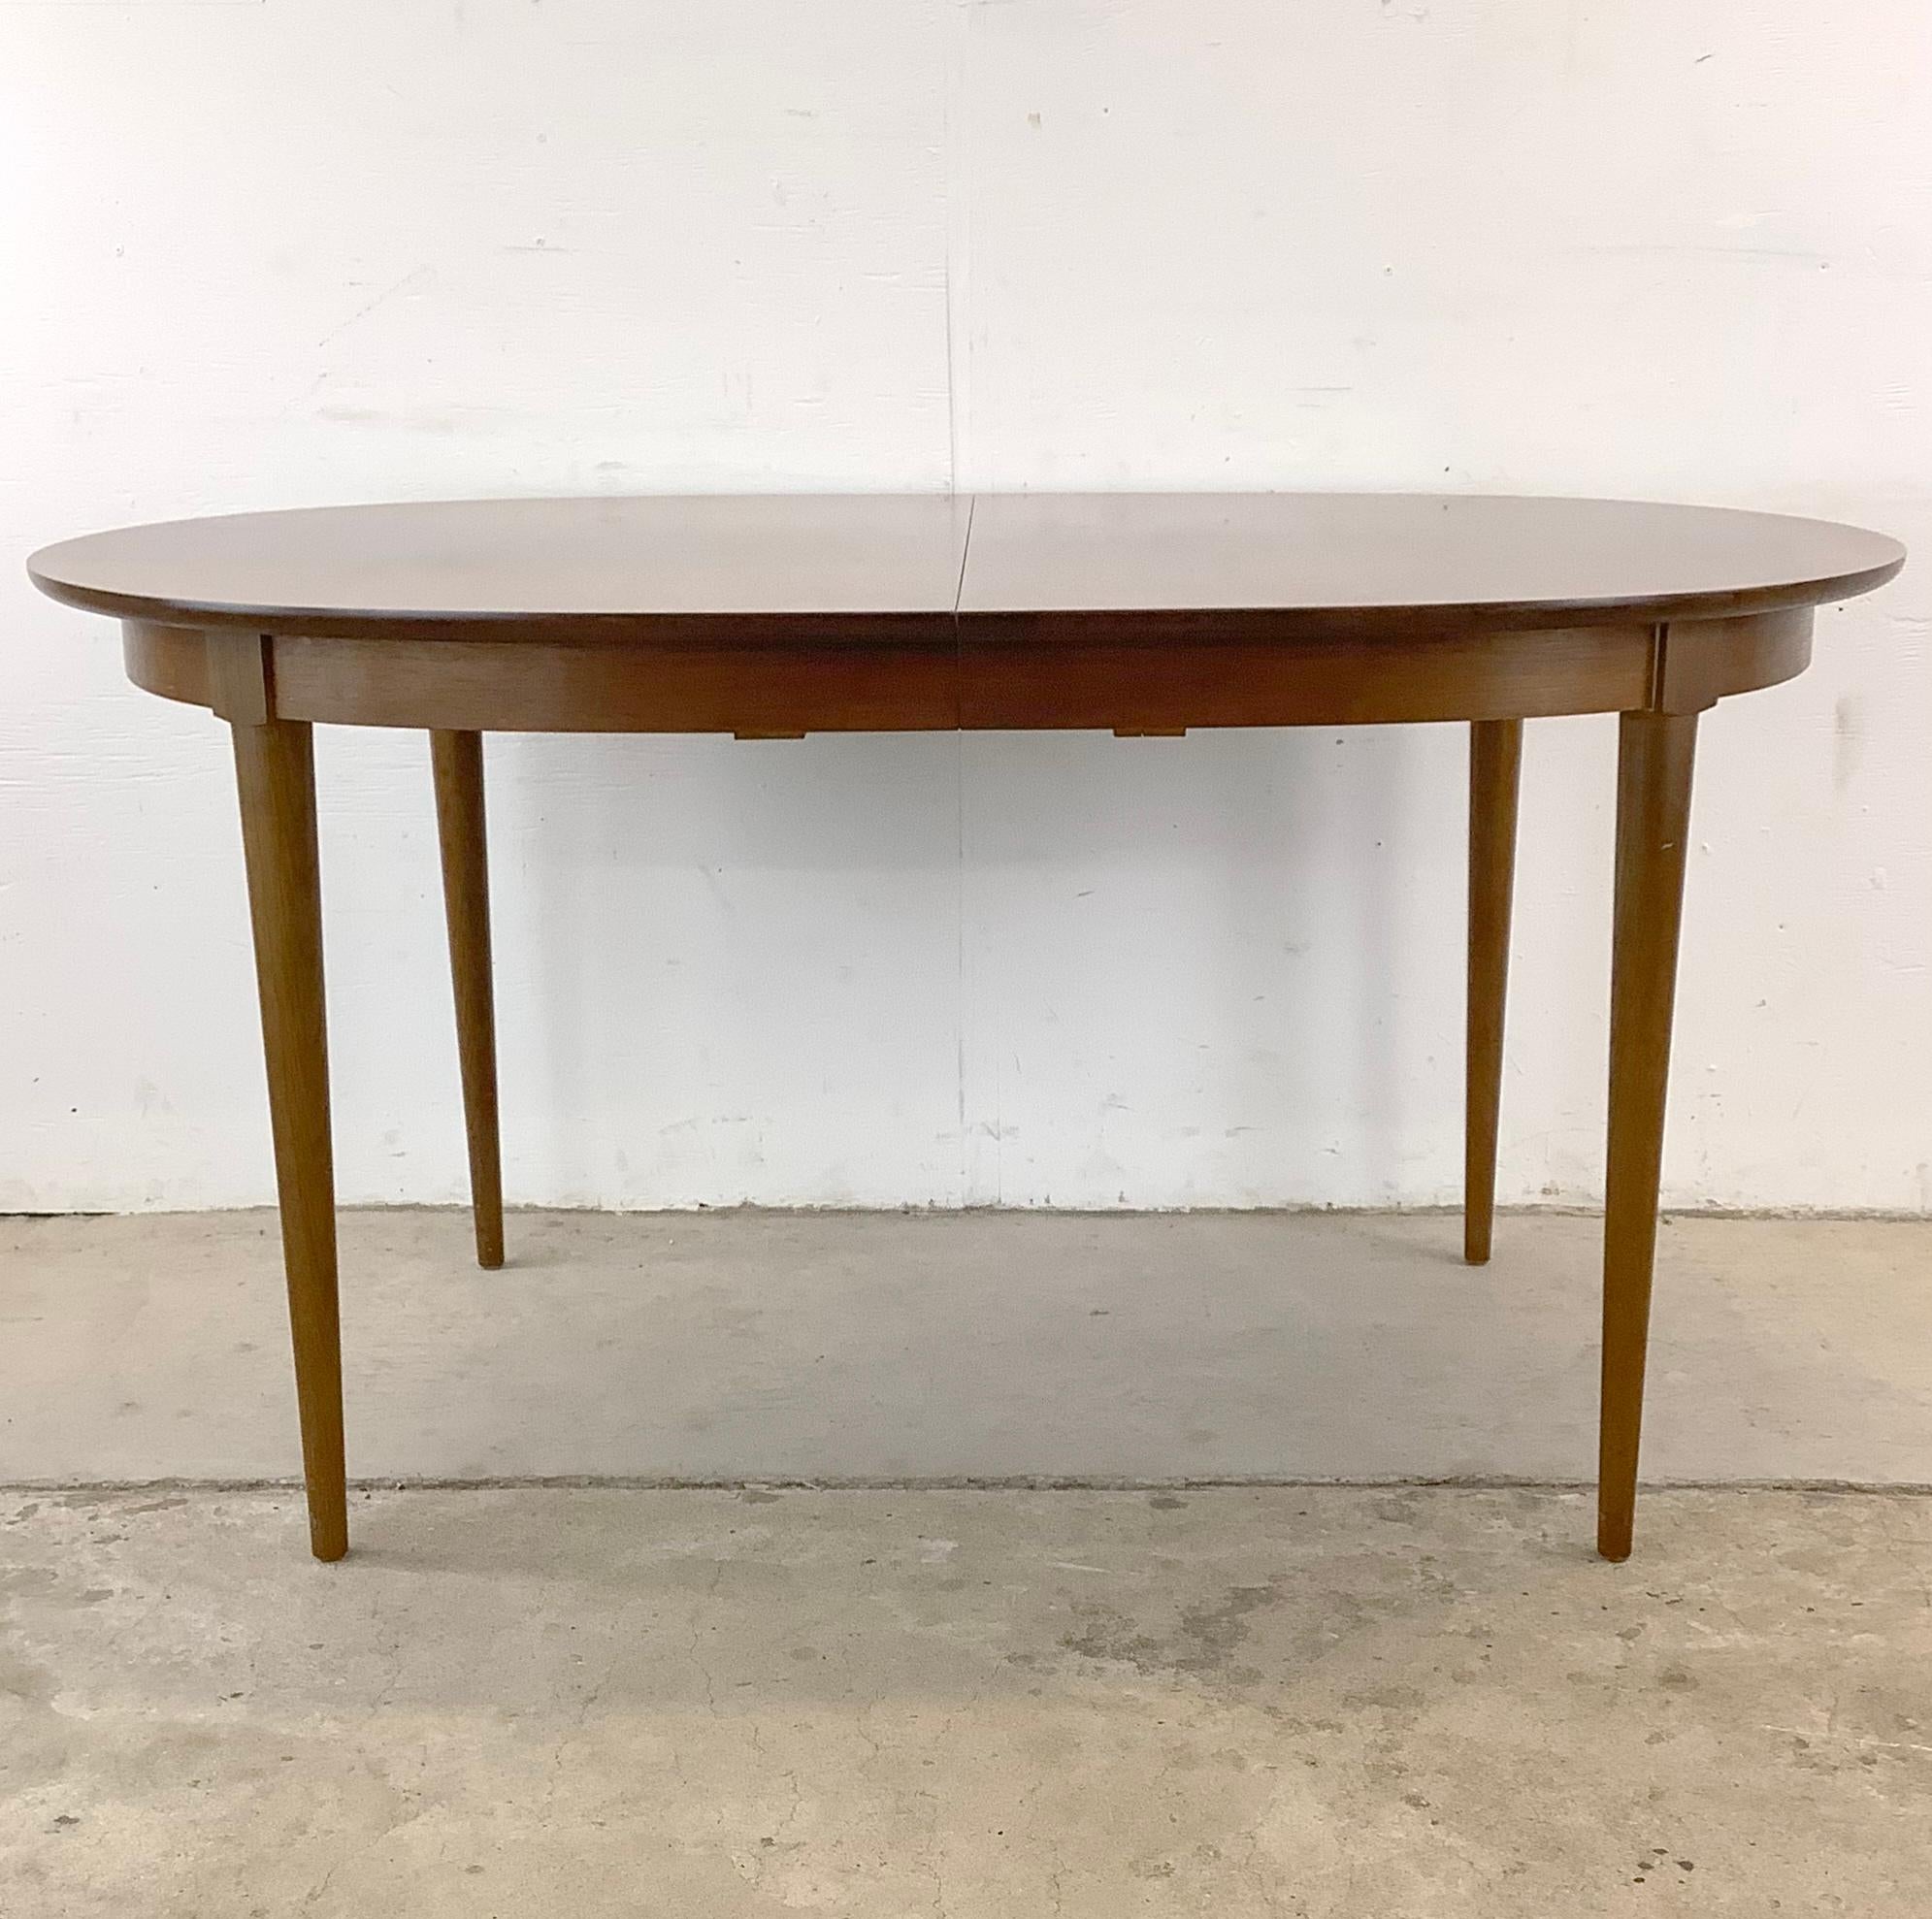 Introducing this unique Vintage R-Way Dining Table with removable leaves– a Danish delight that's sure to elevate your dining experience to new heights. This table exudes mid-century charm with its walnut inlaid rounded oval design, making it a